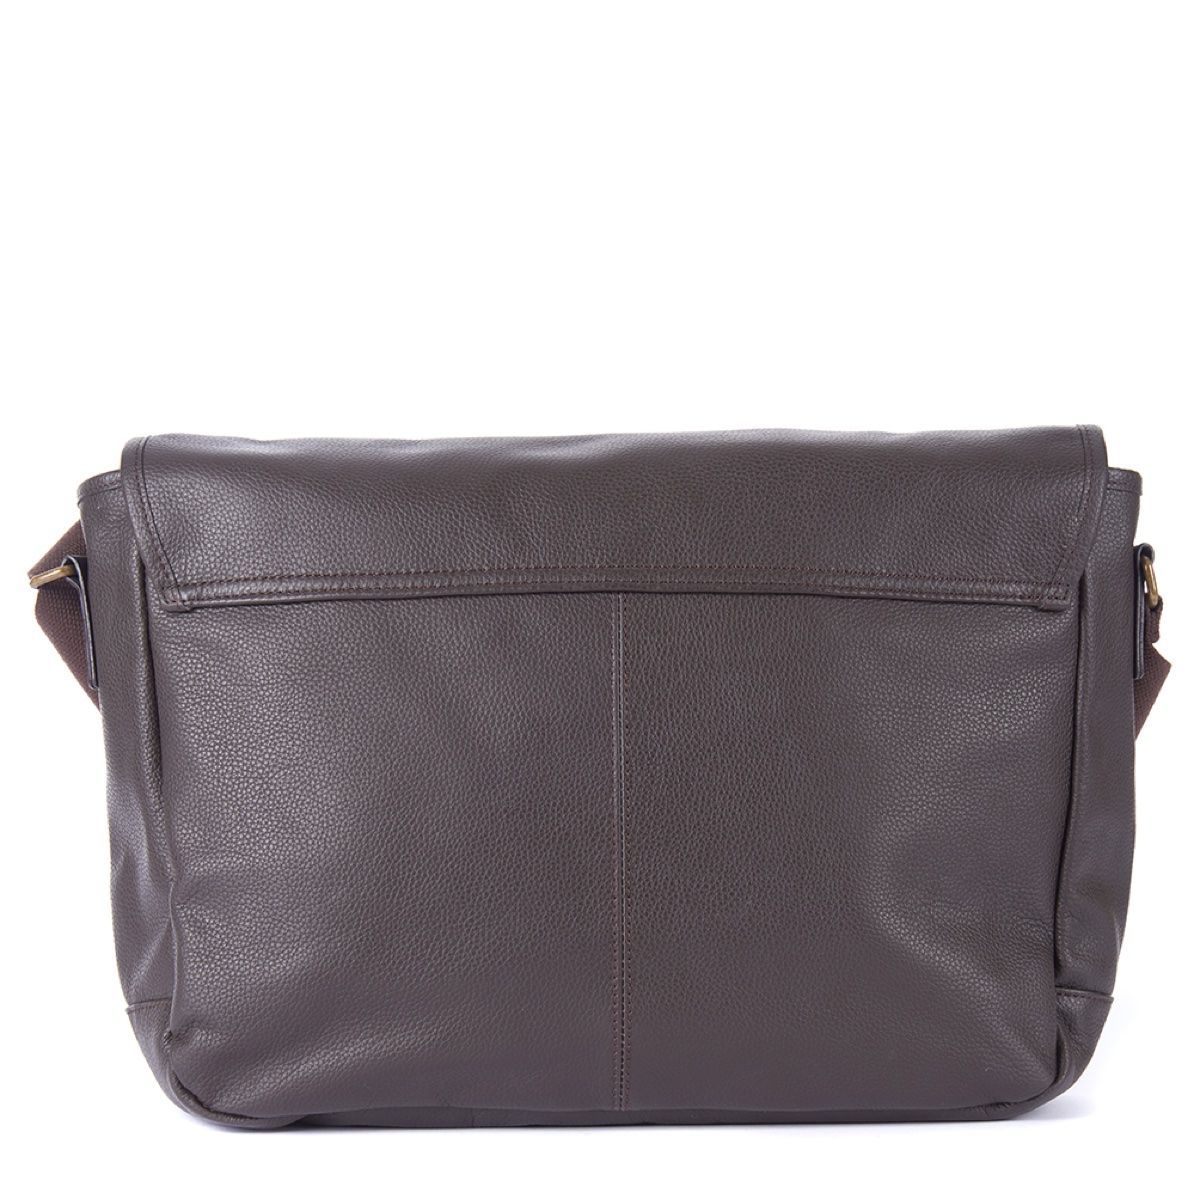 Barbour Holford Leather Cross Body Shoulder Bag | Chocolate